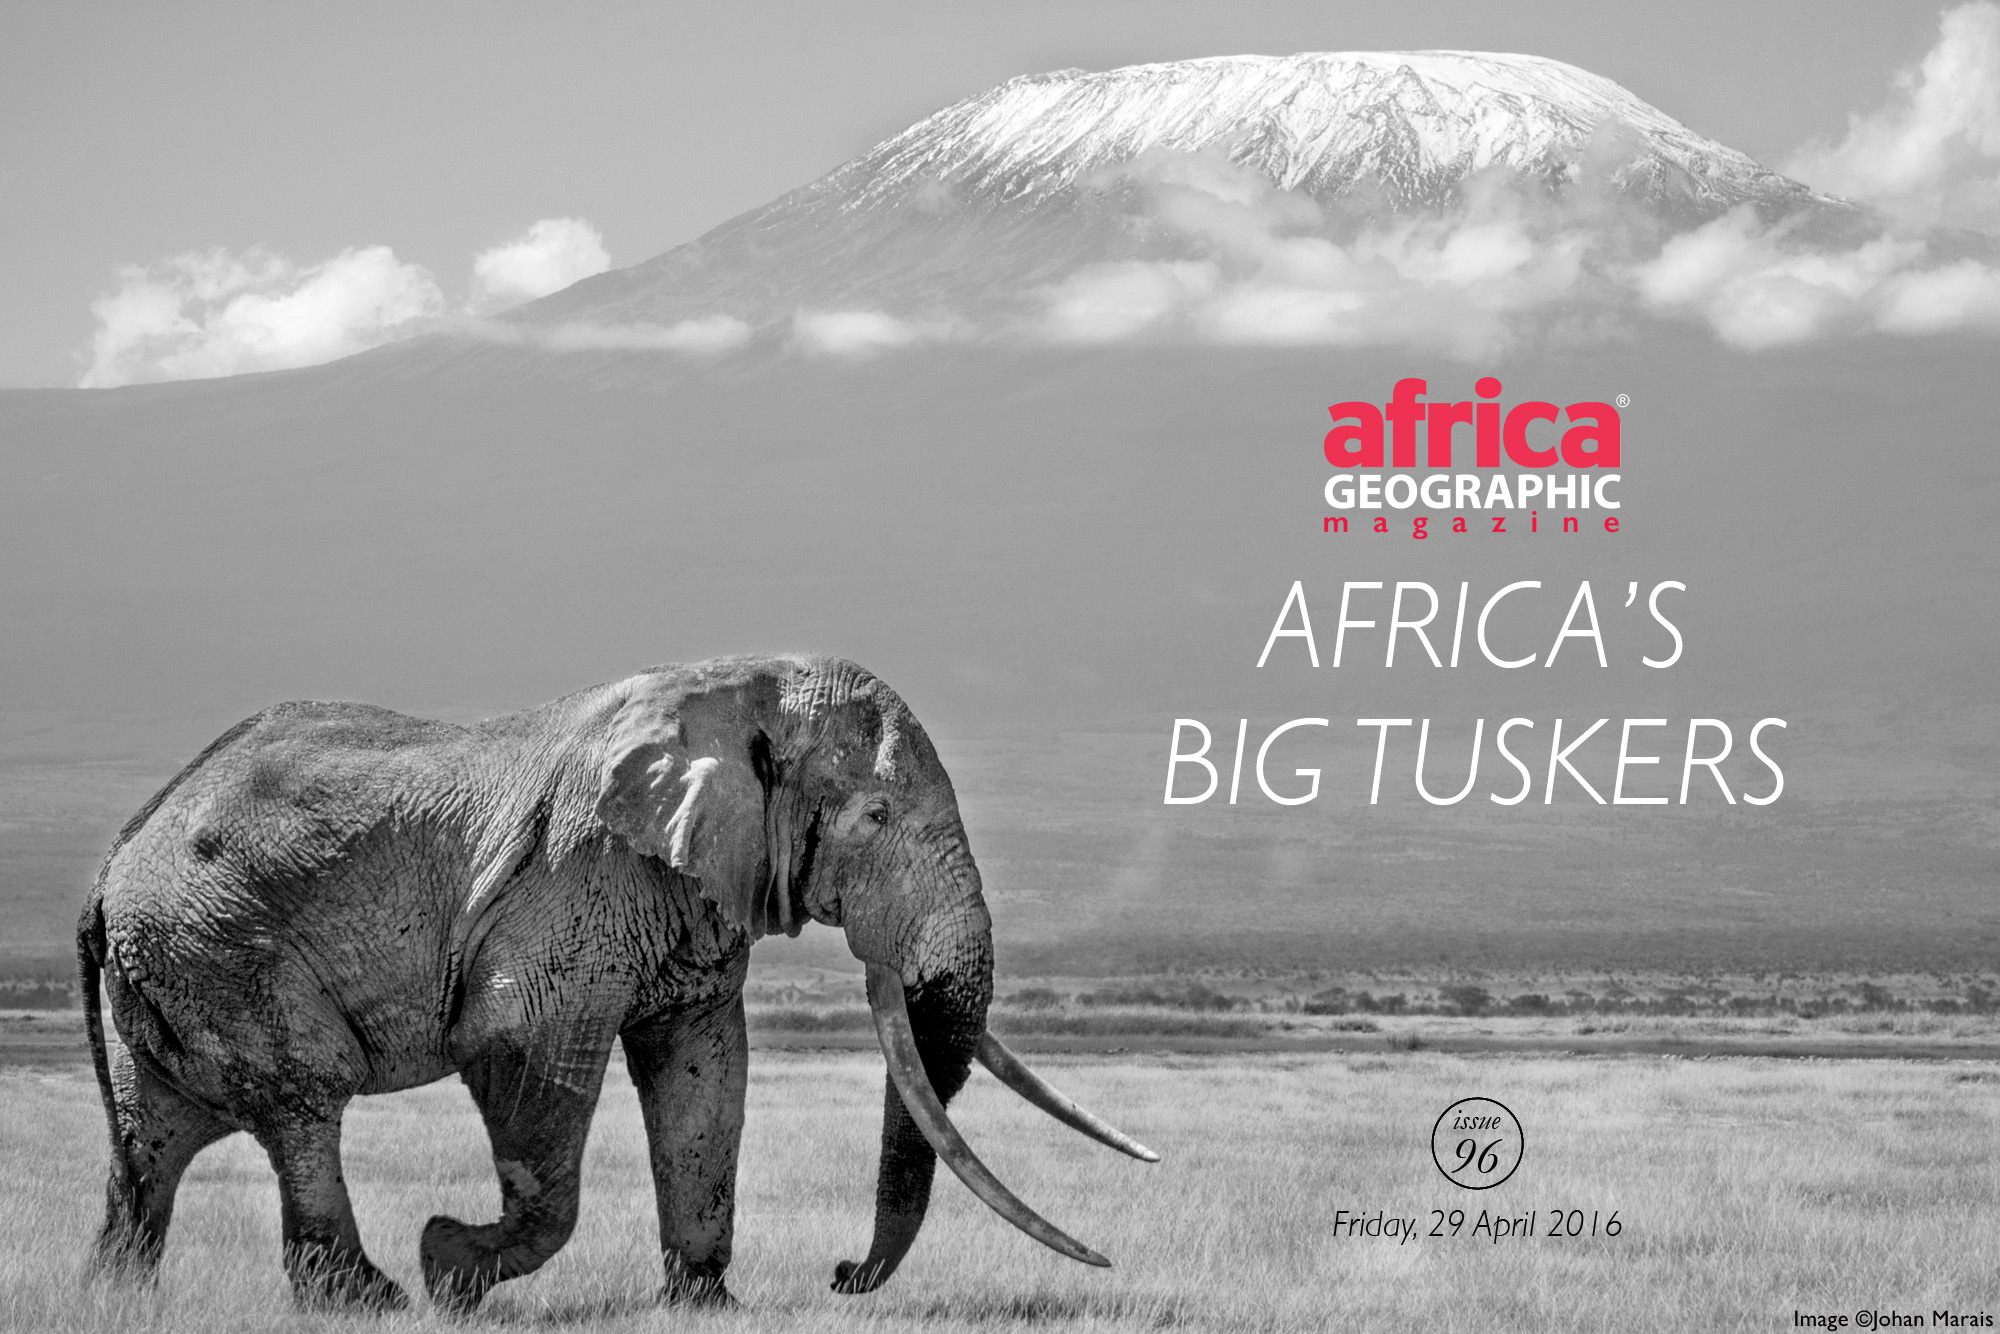 Africa's Big Tuskers - Africa Geographic